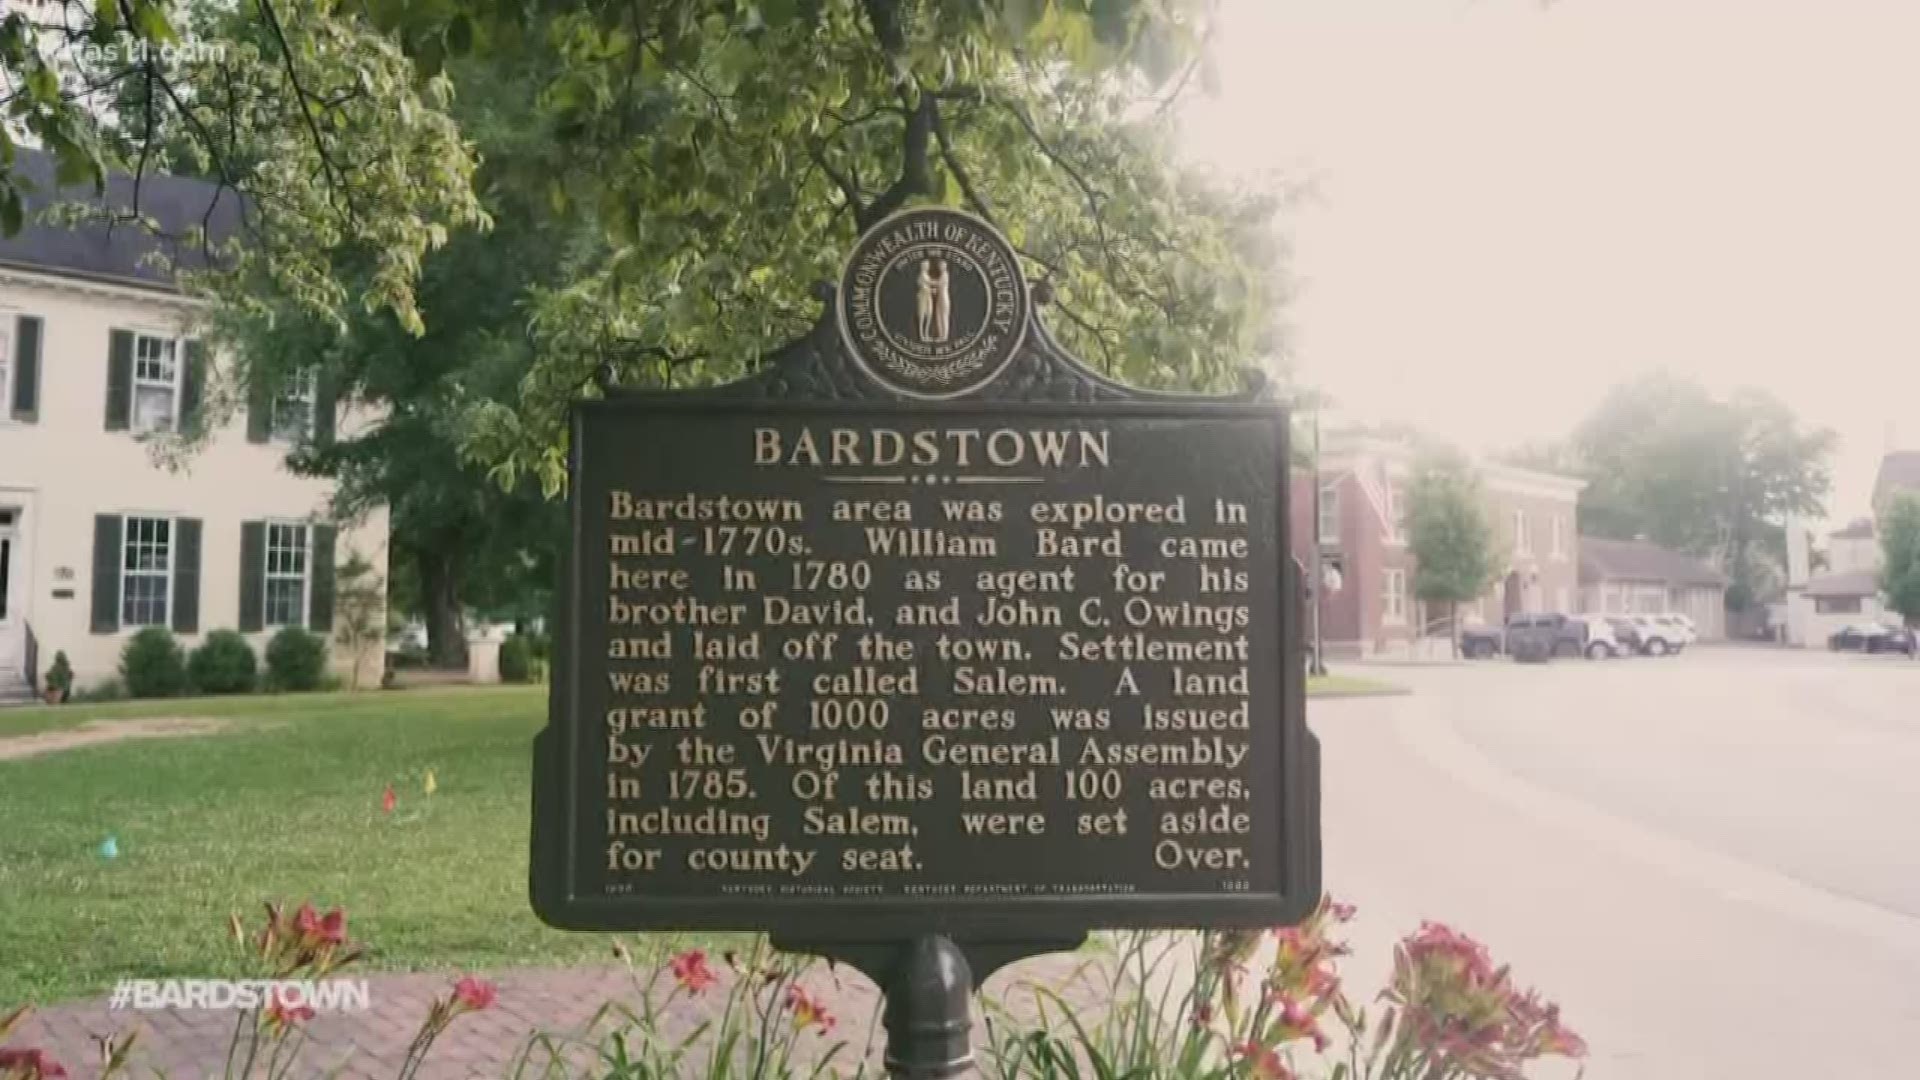 The tiny town of Bardstown holds dark secrets. Five people have unsolved cases: Jason Ellis, Crystal Rogers, Tommy Ballard and Kathy and Samantha Netherland.